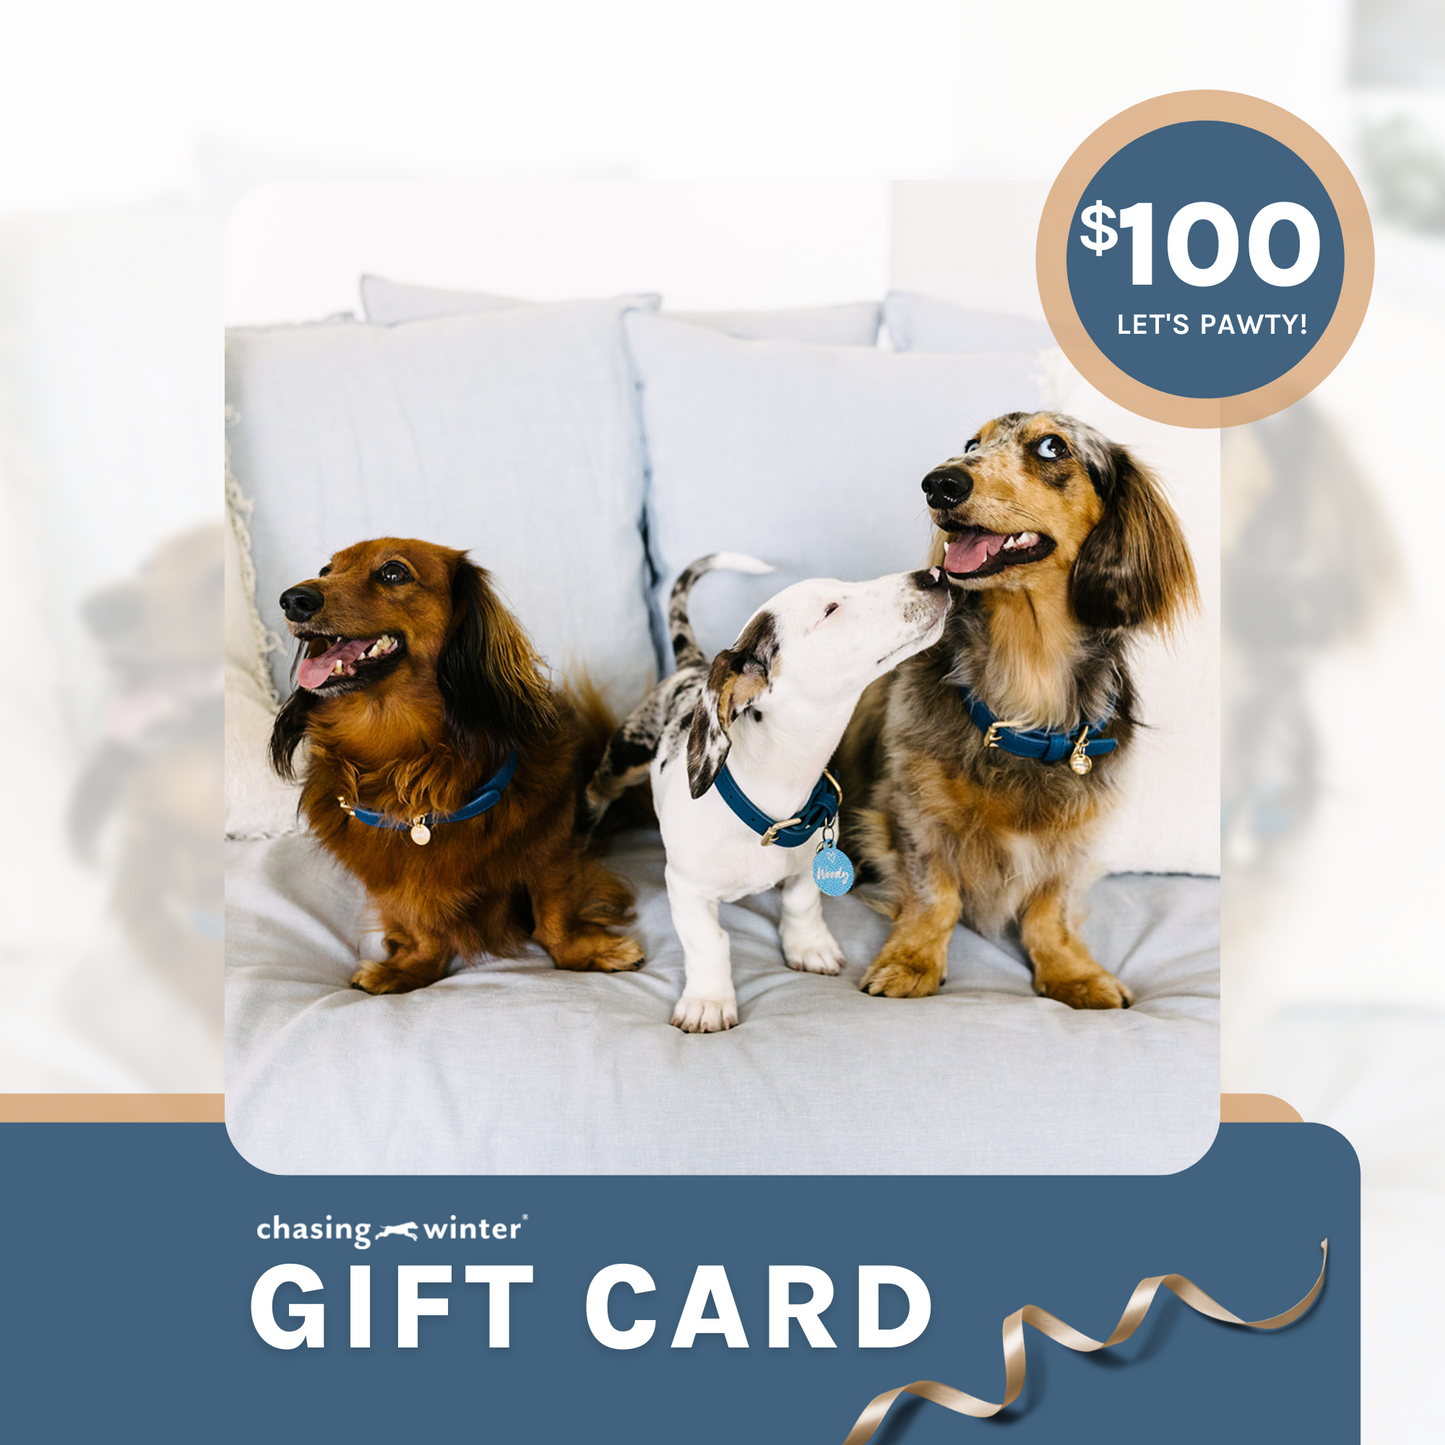 Chasing Winter Gift Card $100